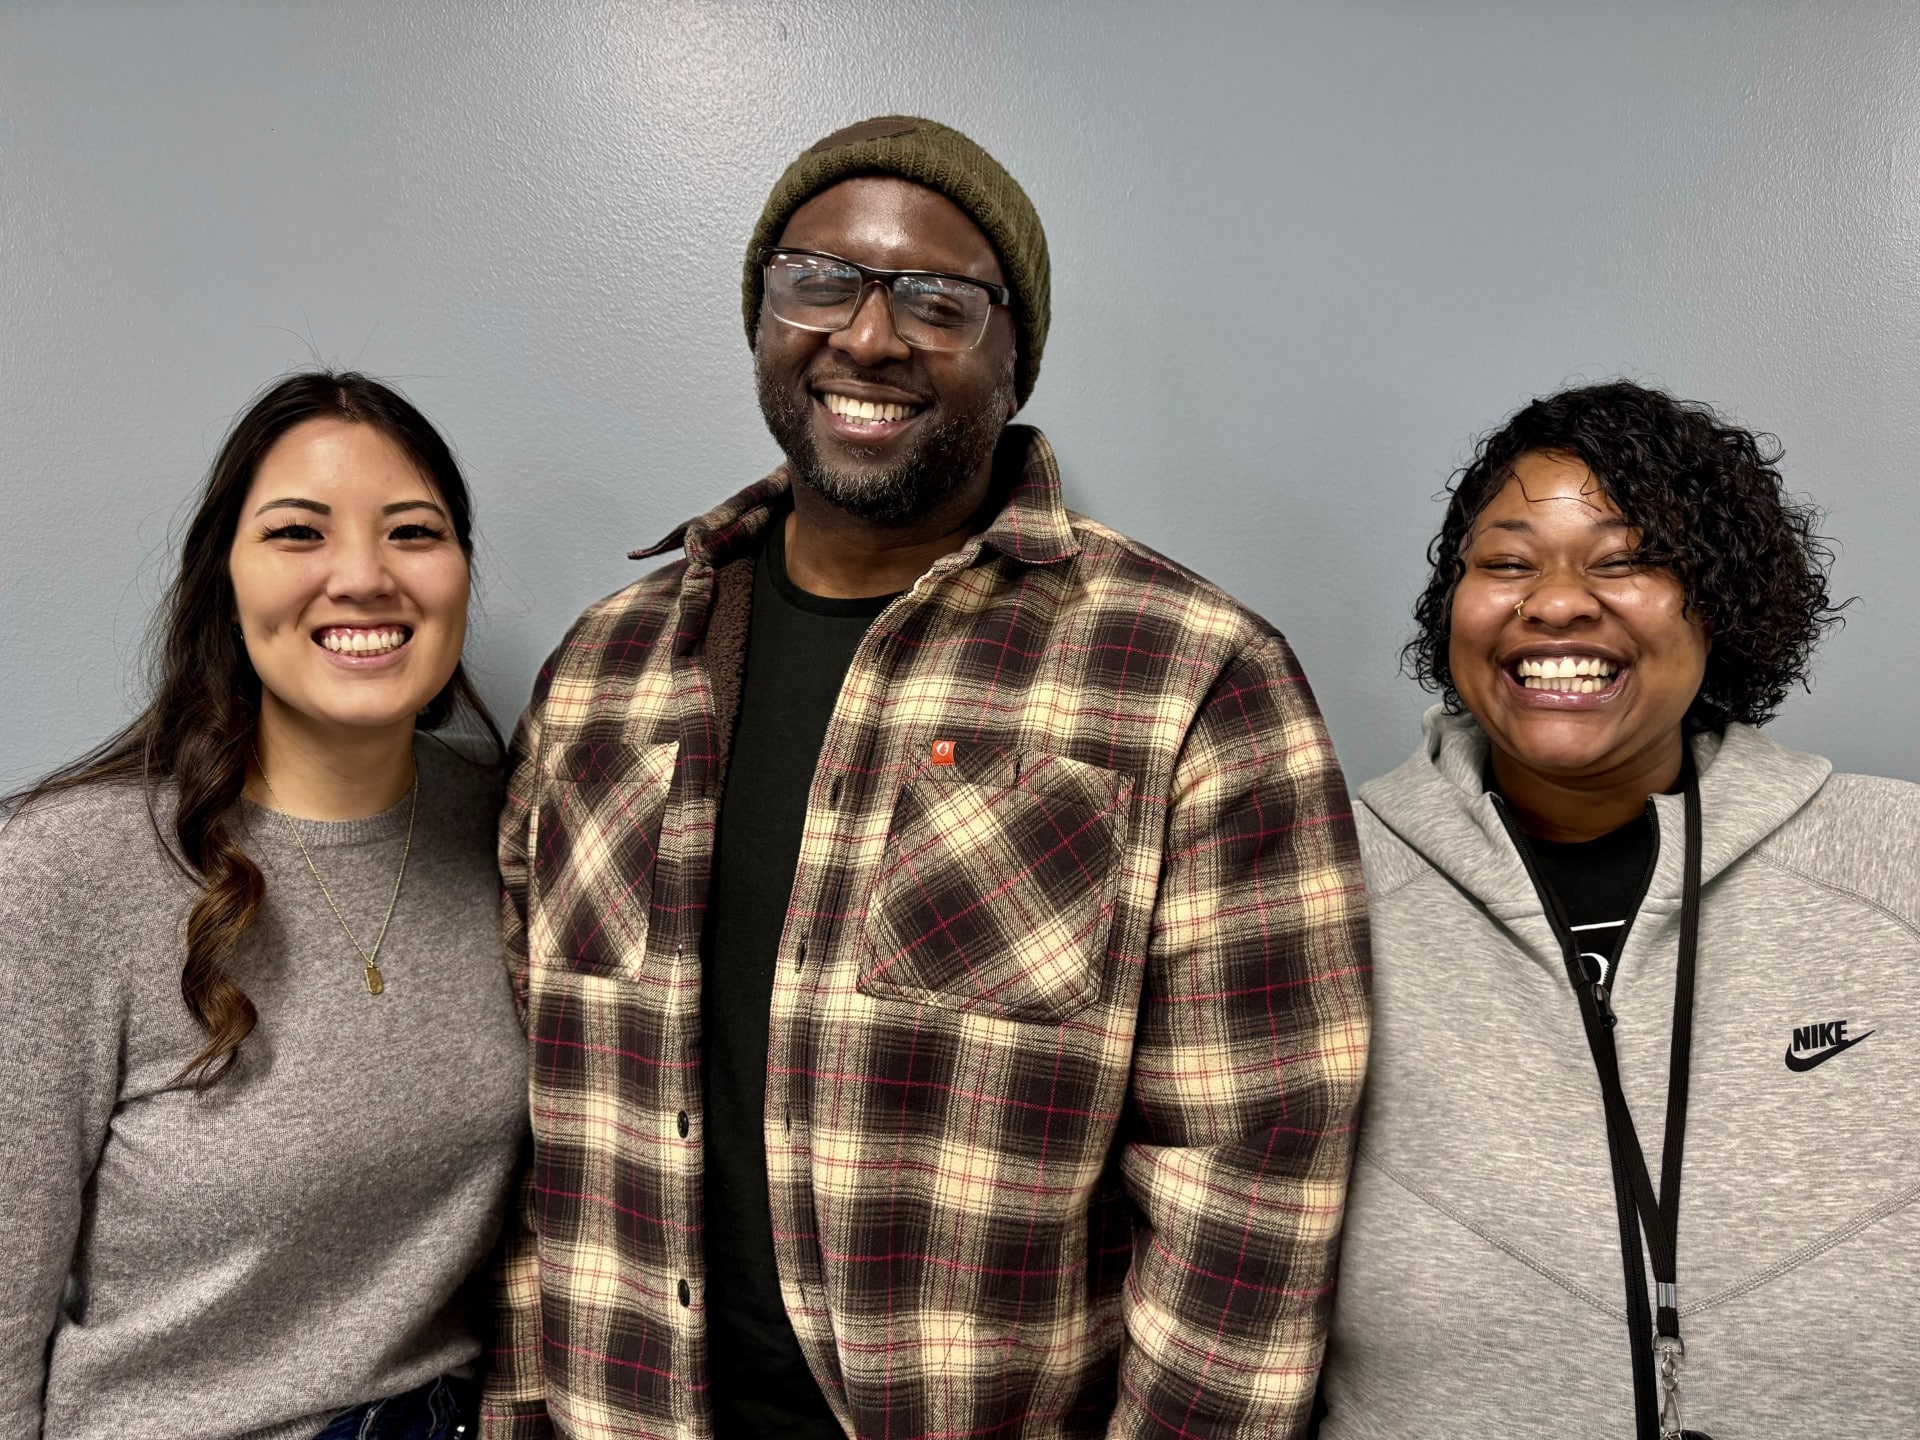 Sarah Zavaleta, Terry Mowatt, and Marie Wiley from left to right. All three are part of Seattle's pilot program aiming to breaks the prison-homelessness cycle